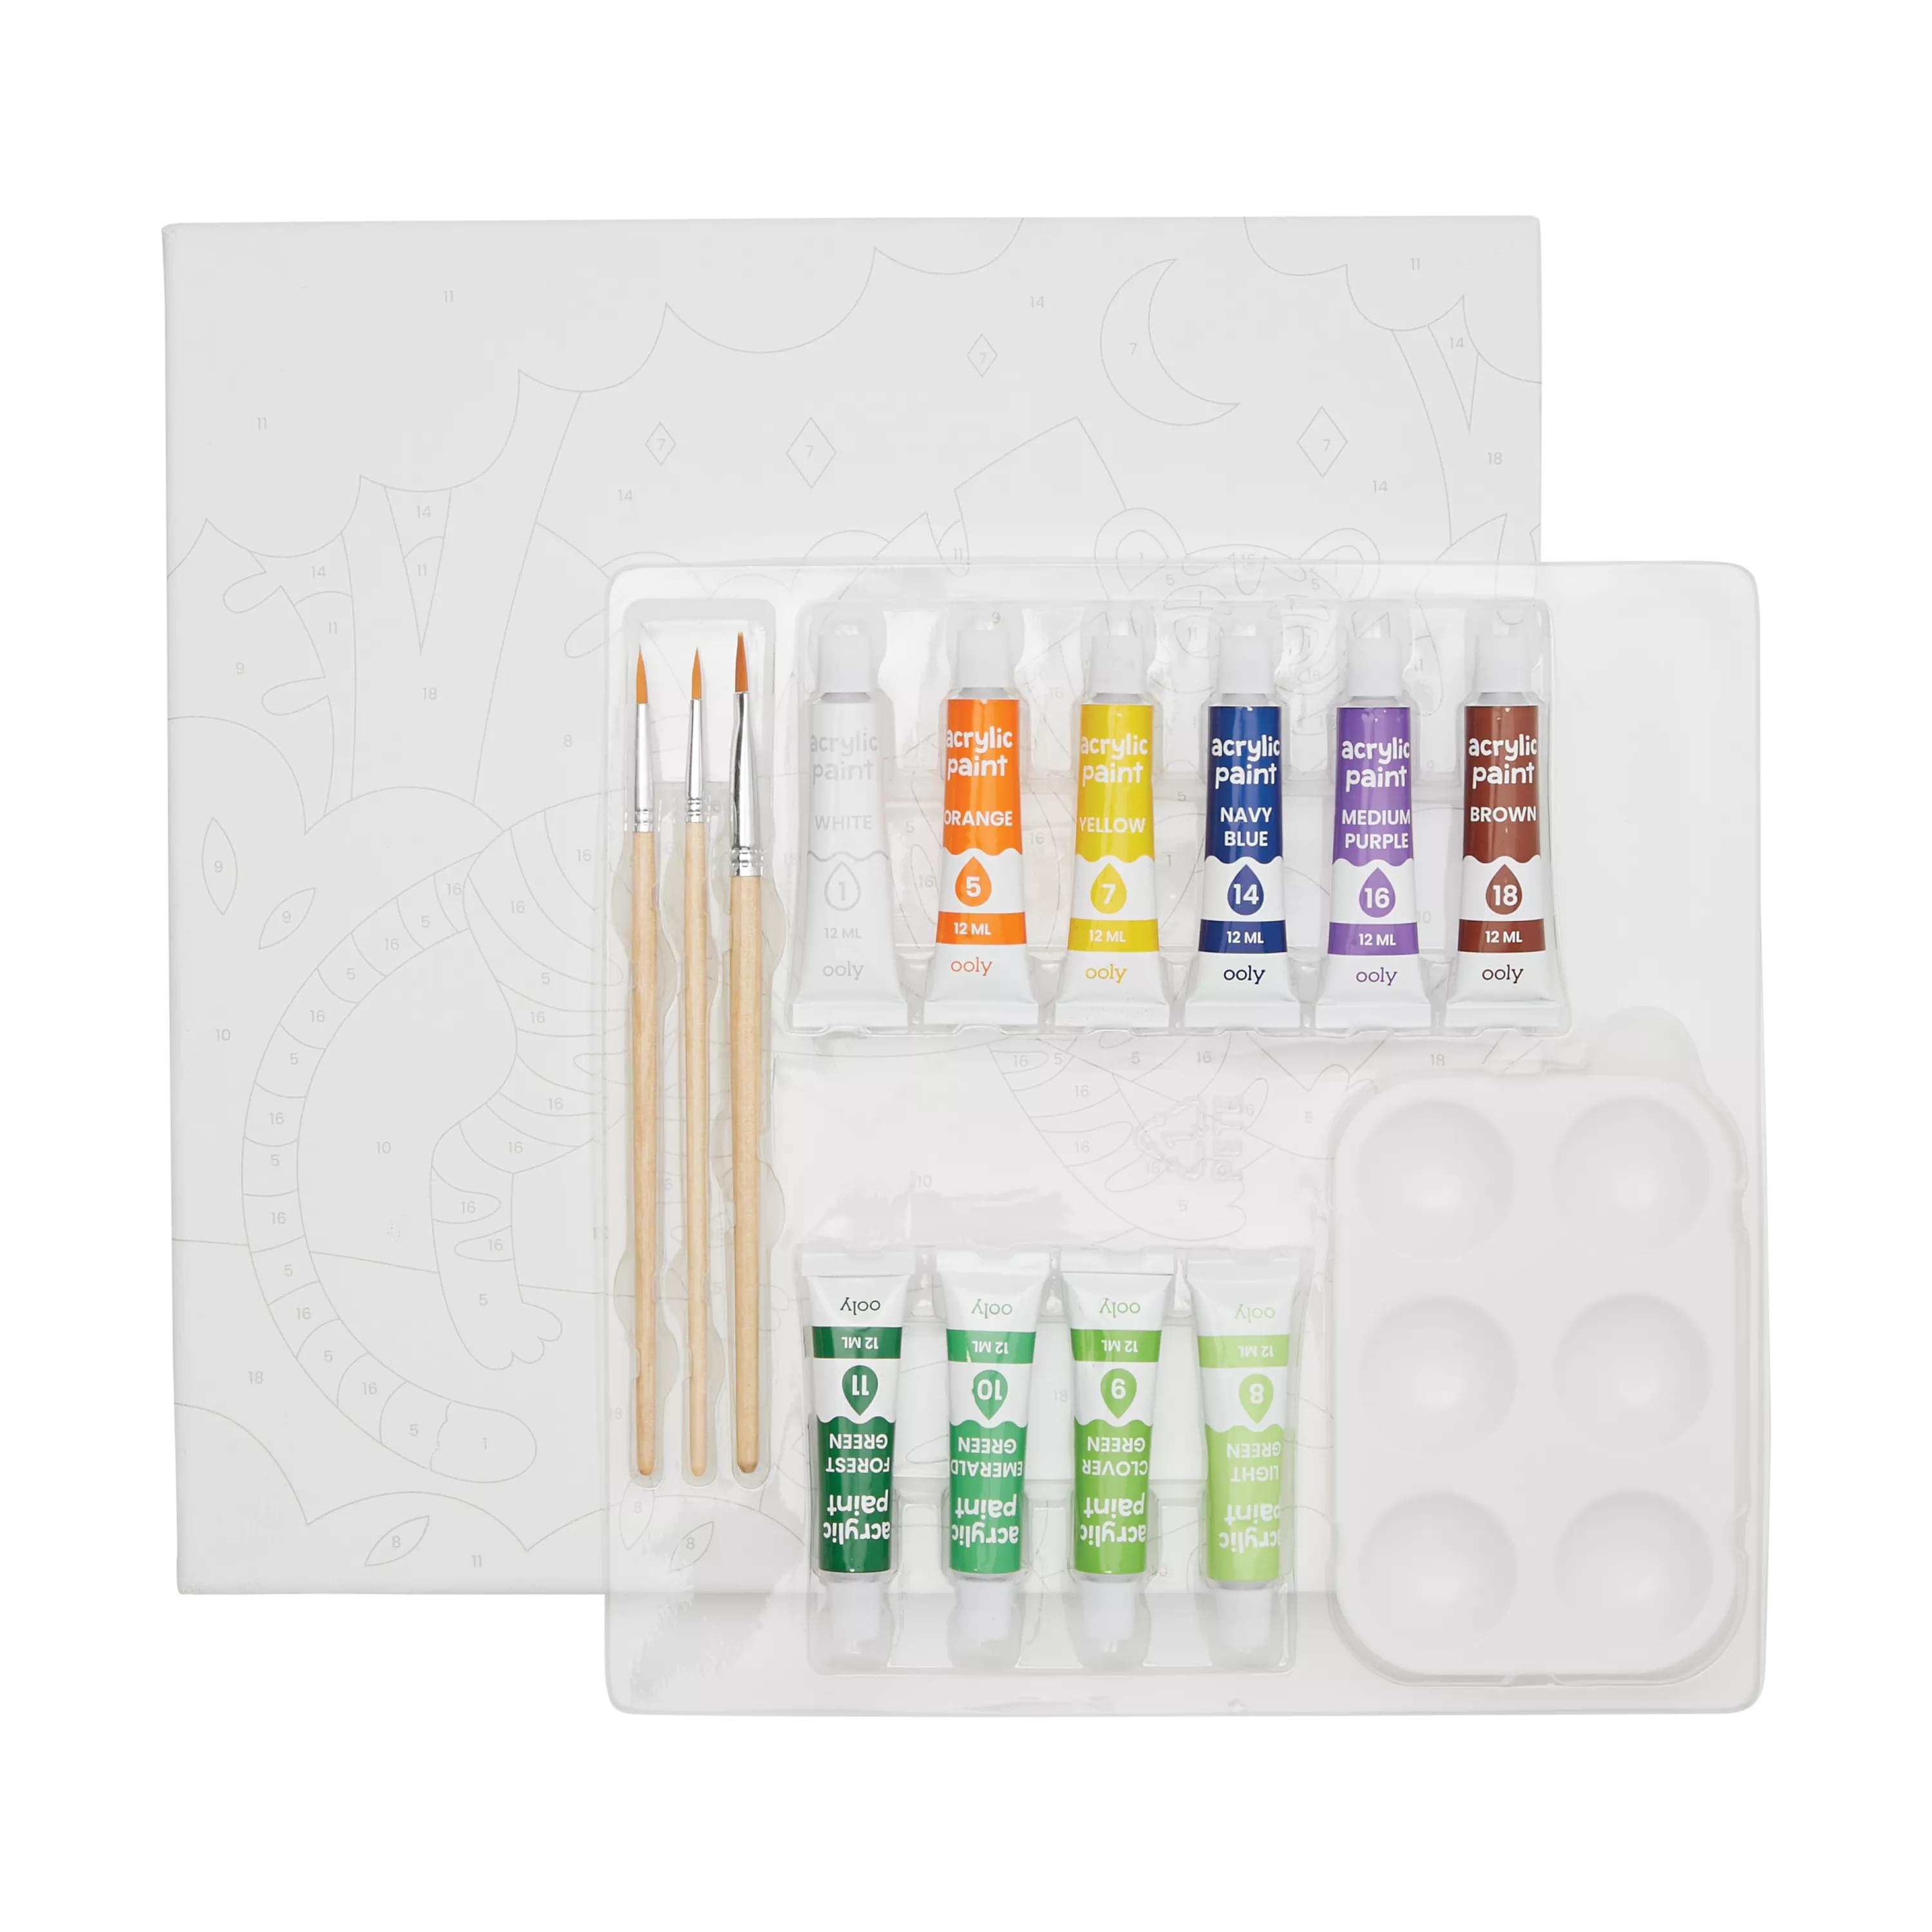 OOLY Colorific Canvas Terrific Tiger Paint-By-Number Kit